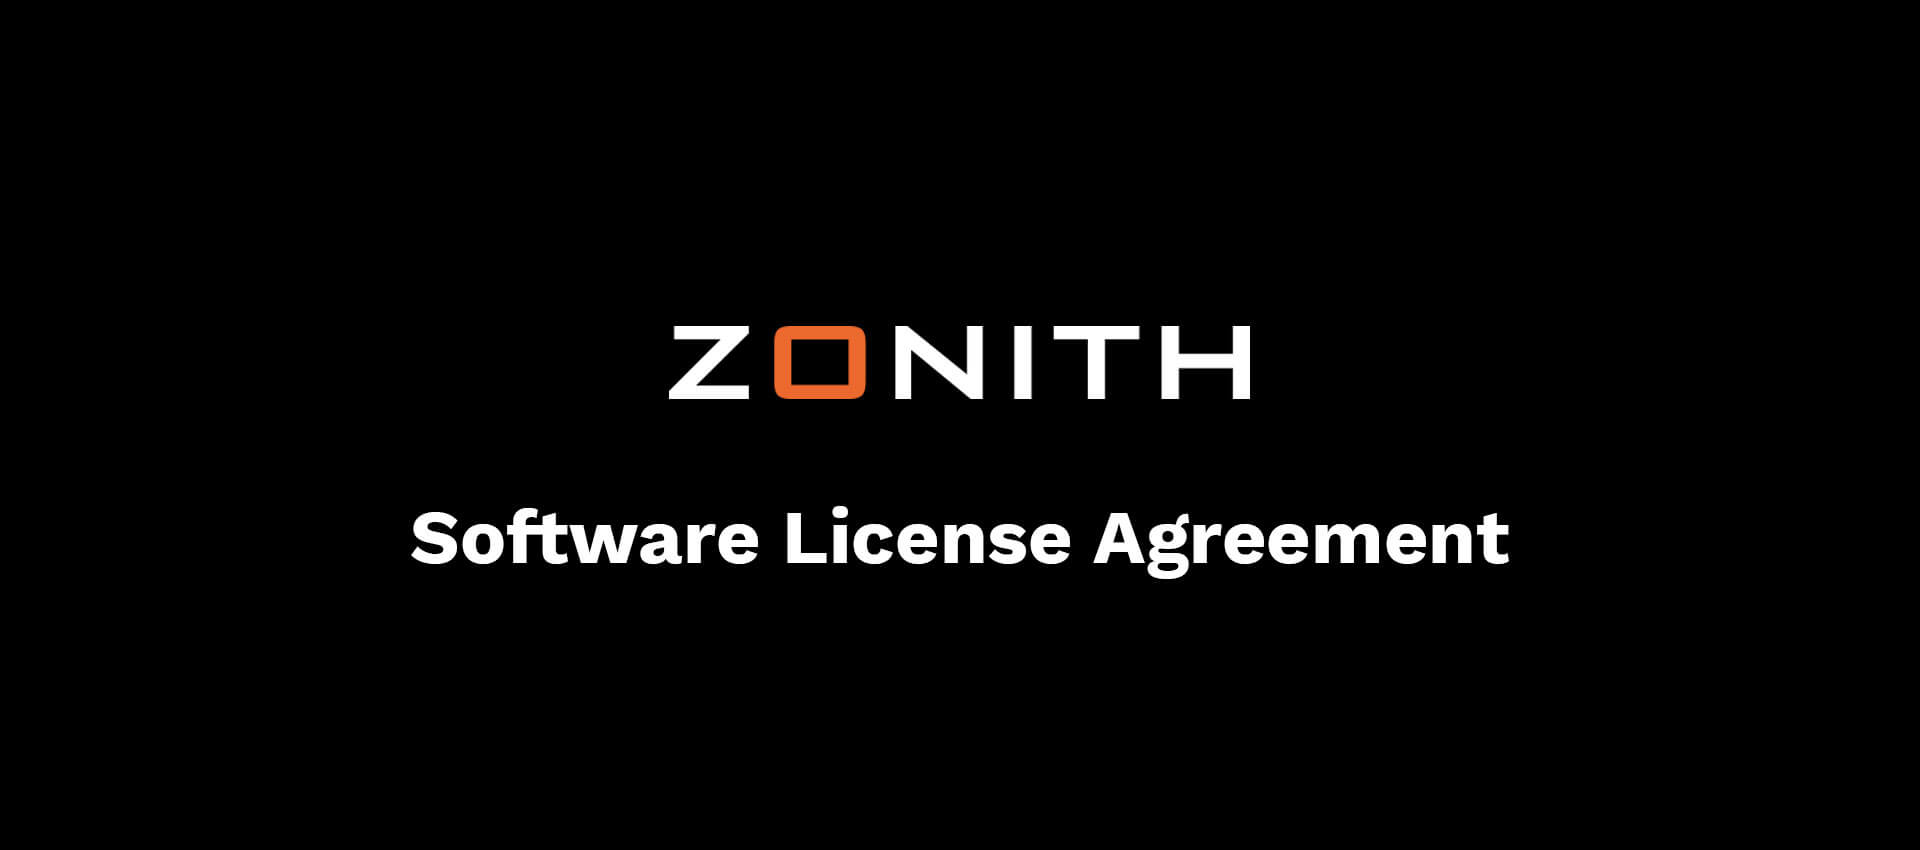 ZONITH-Software-License-Agreement